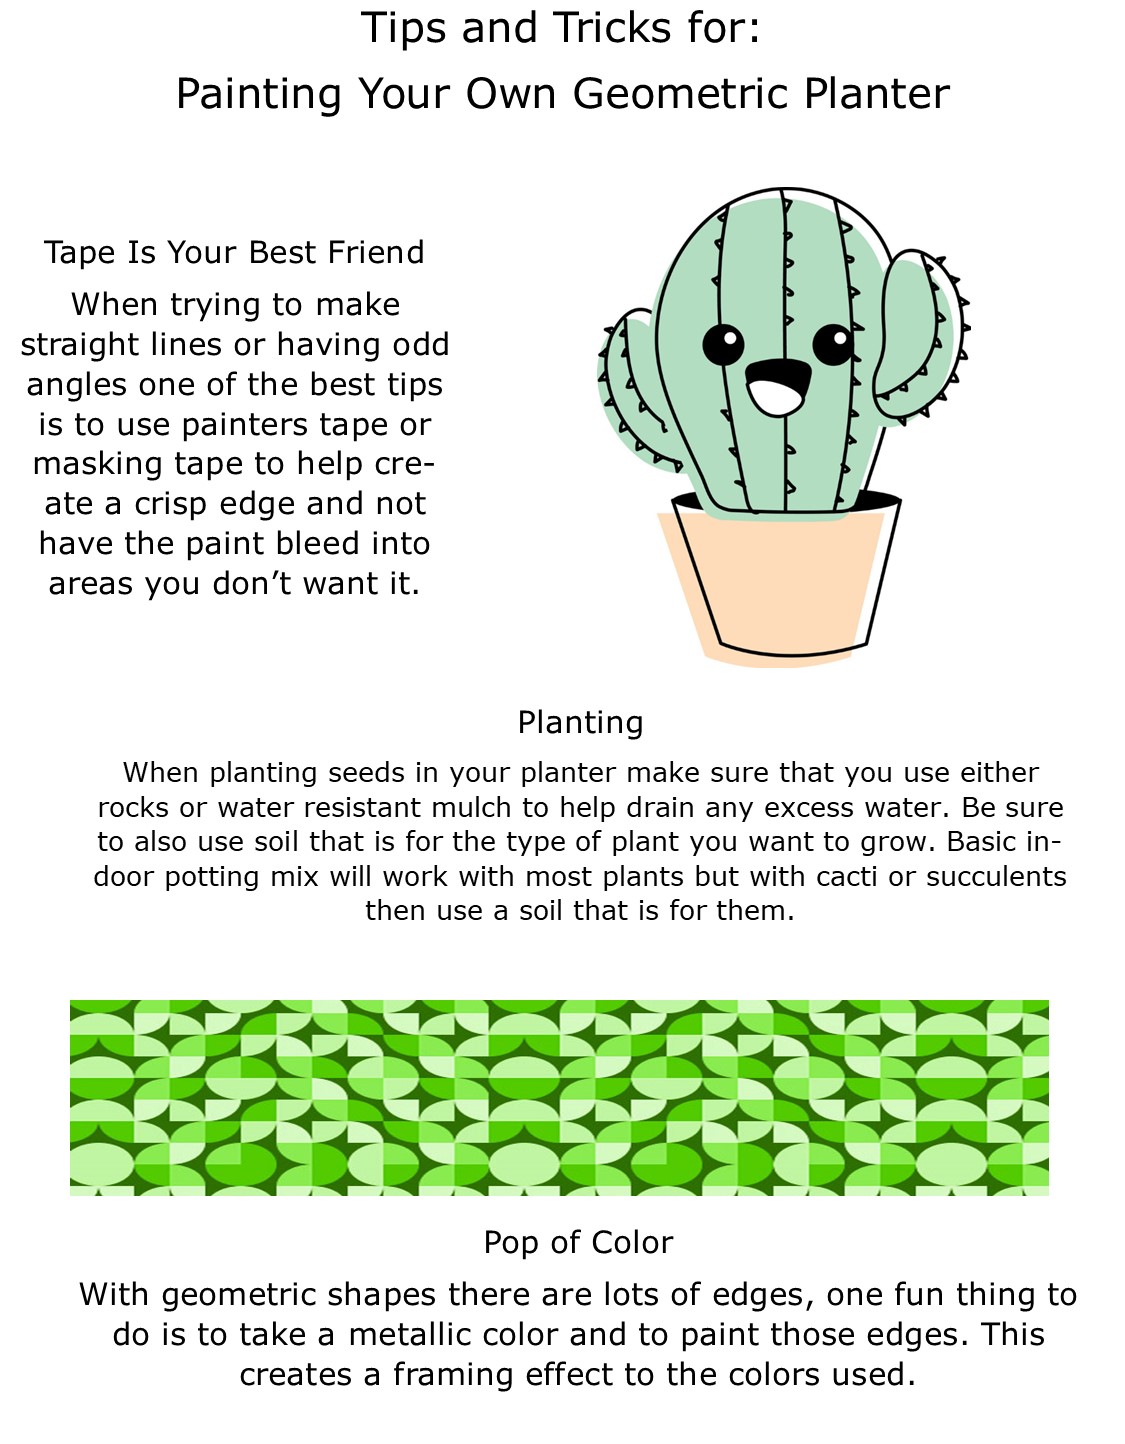 Tips and Tricks for Painting Planter